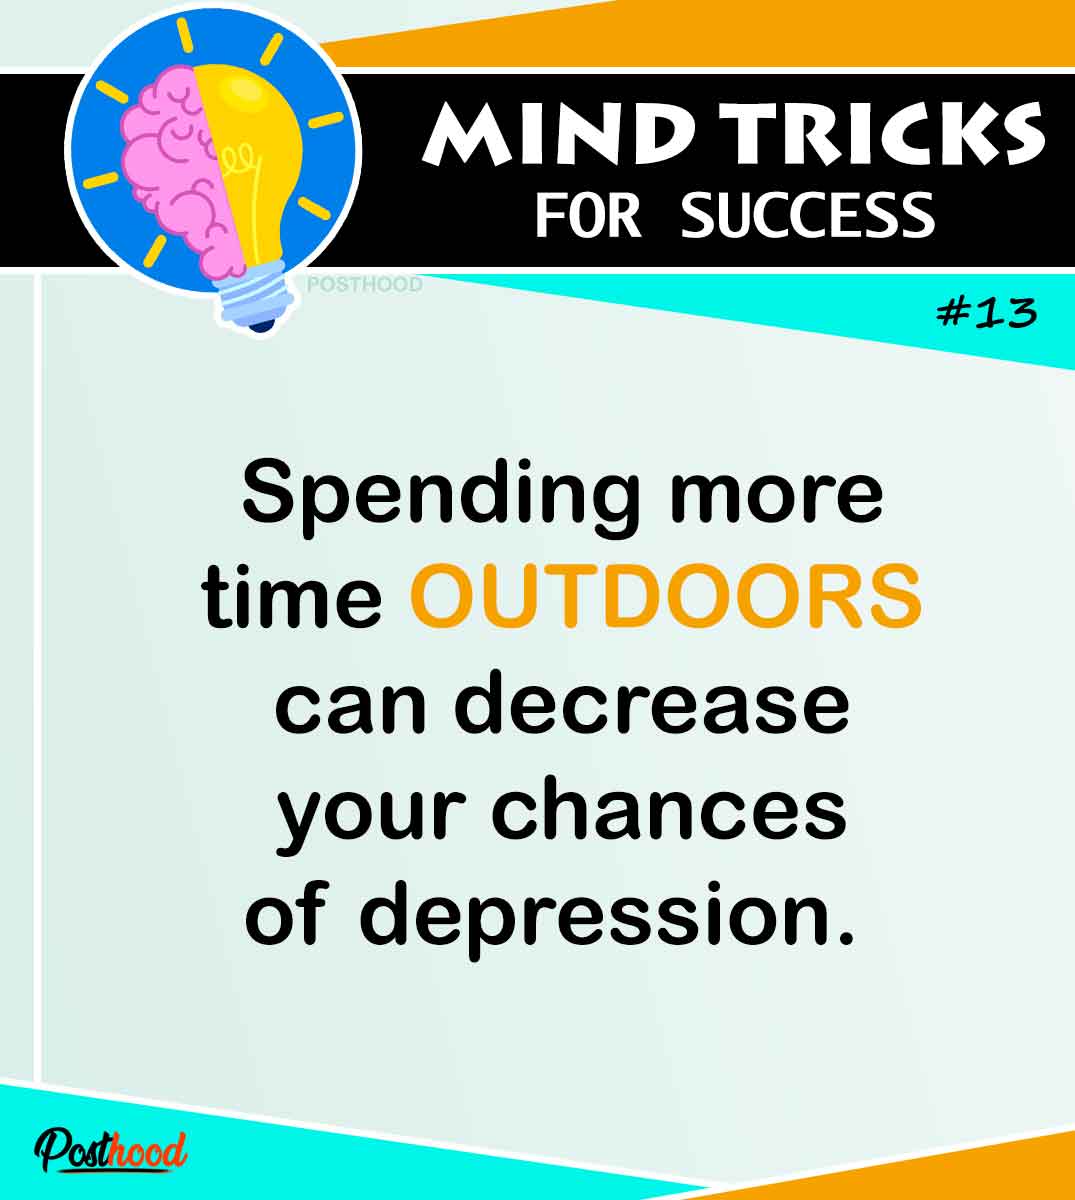 35 brilliant mind tricks to boost calmness and trigger great performance in life. Best psychology tricks to use in everyday life.